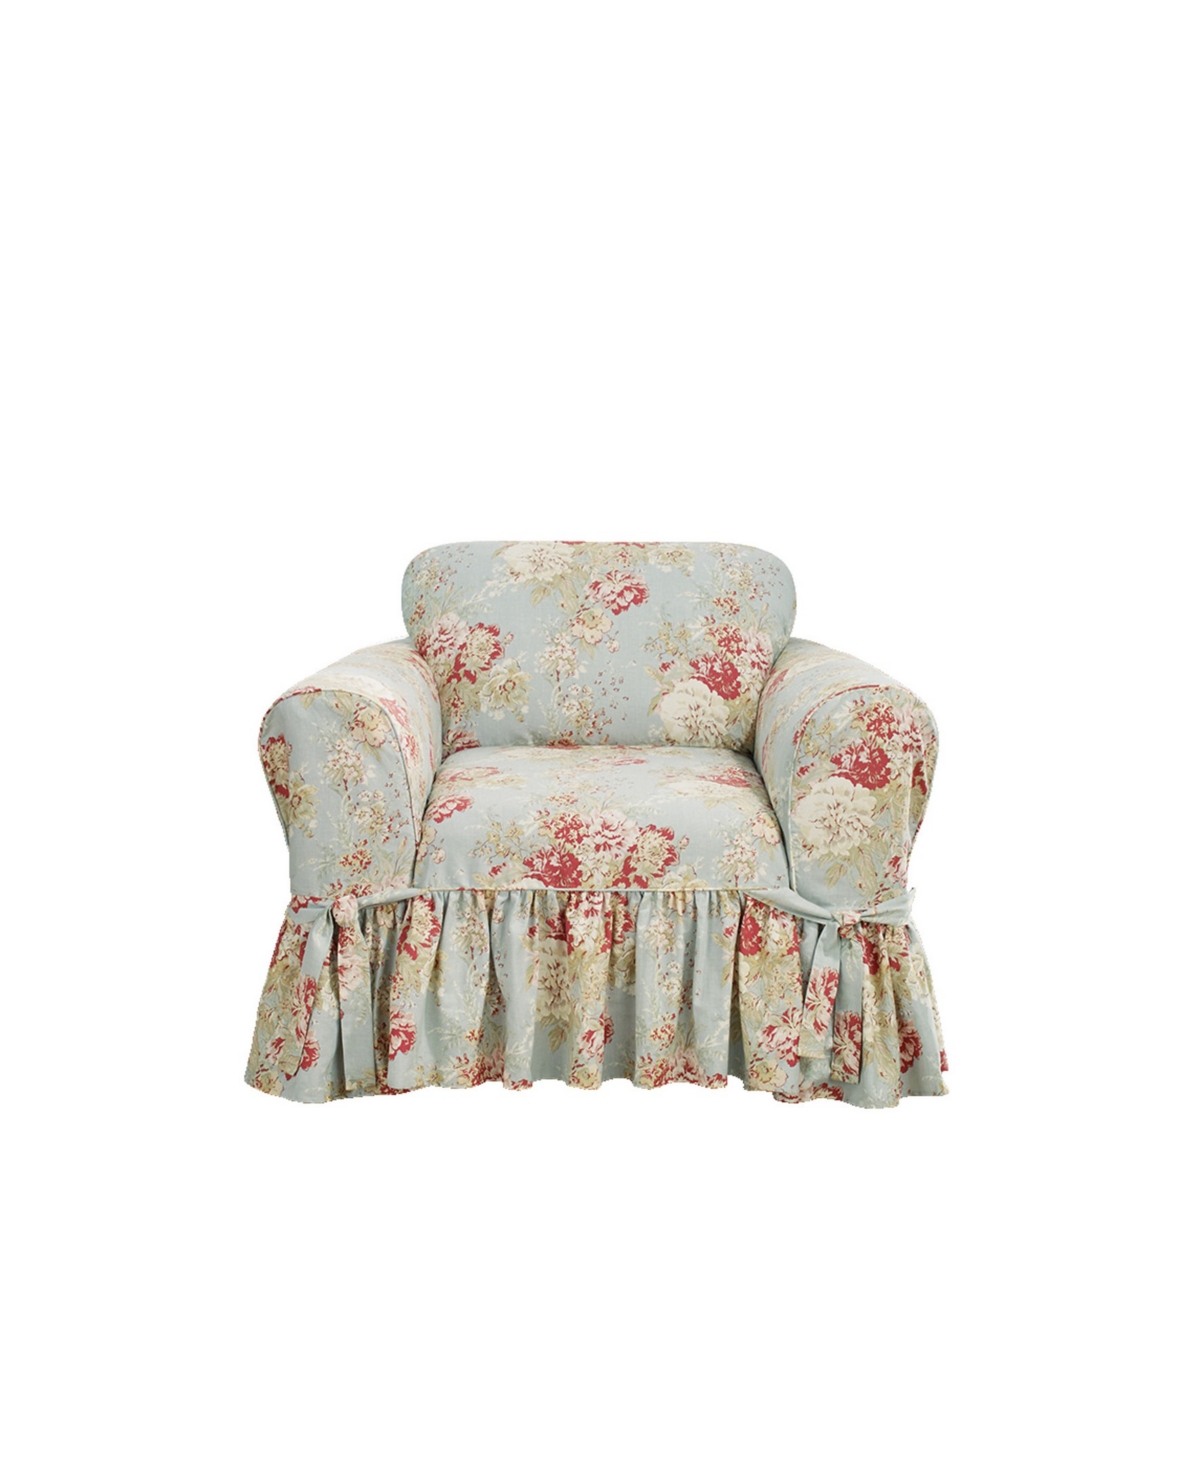 Waverly Ballad Bouquet Chair Slipcover, 40" X 43" In Robin's Egg